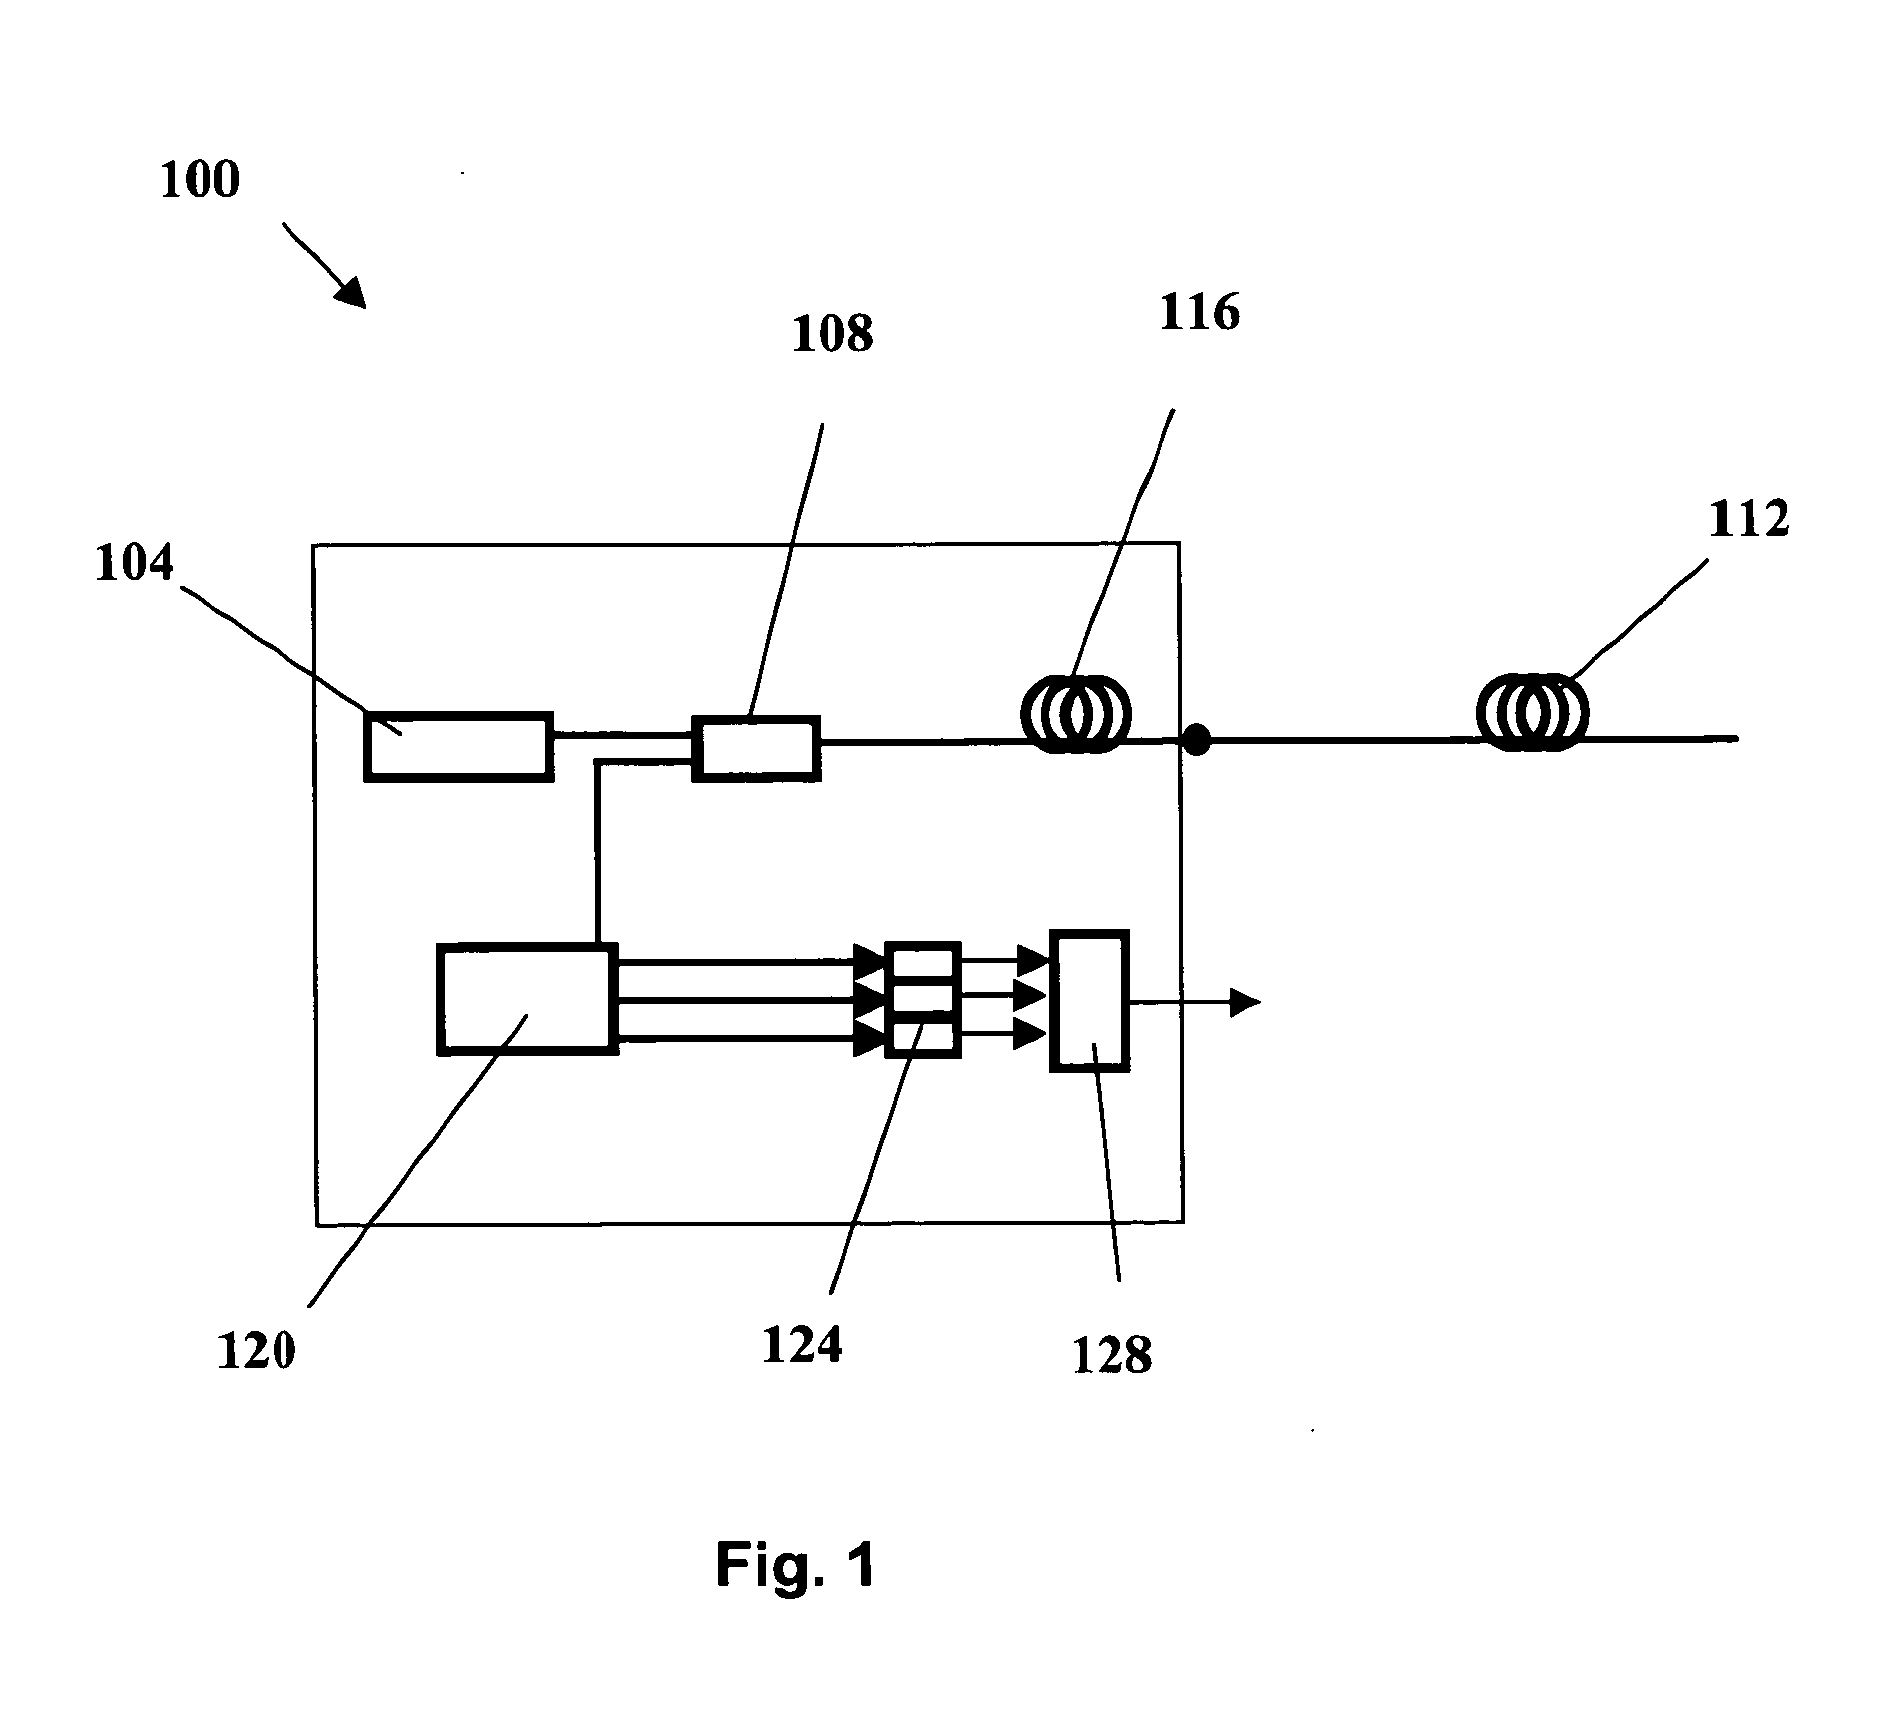 Auto-correcting or self-calibrating DTS temperature sensing systems and methods